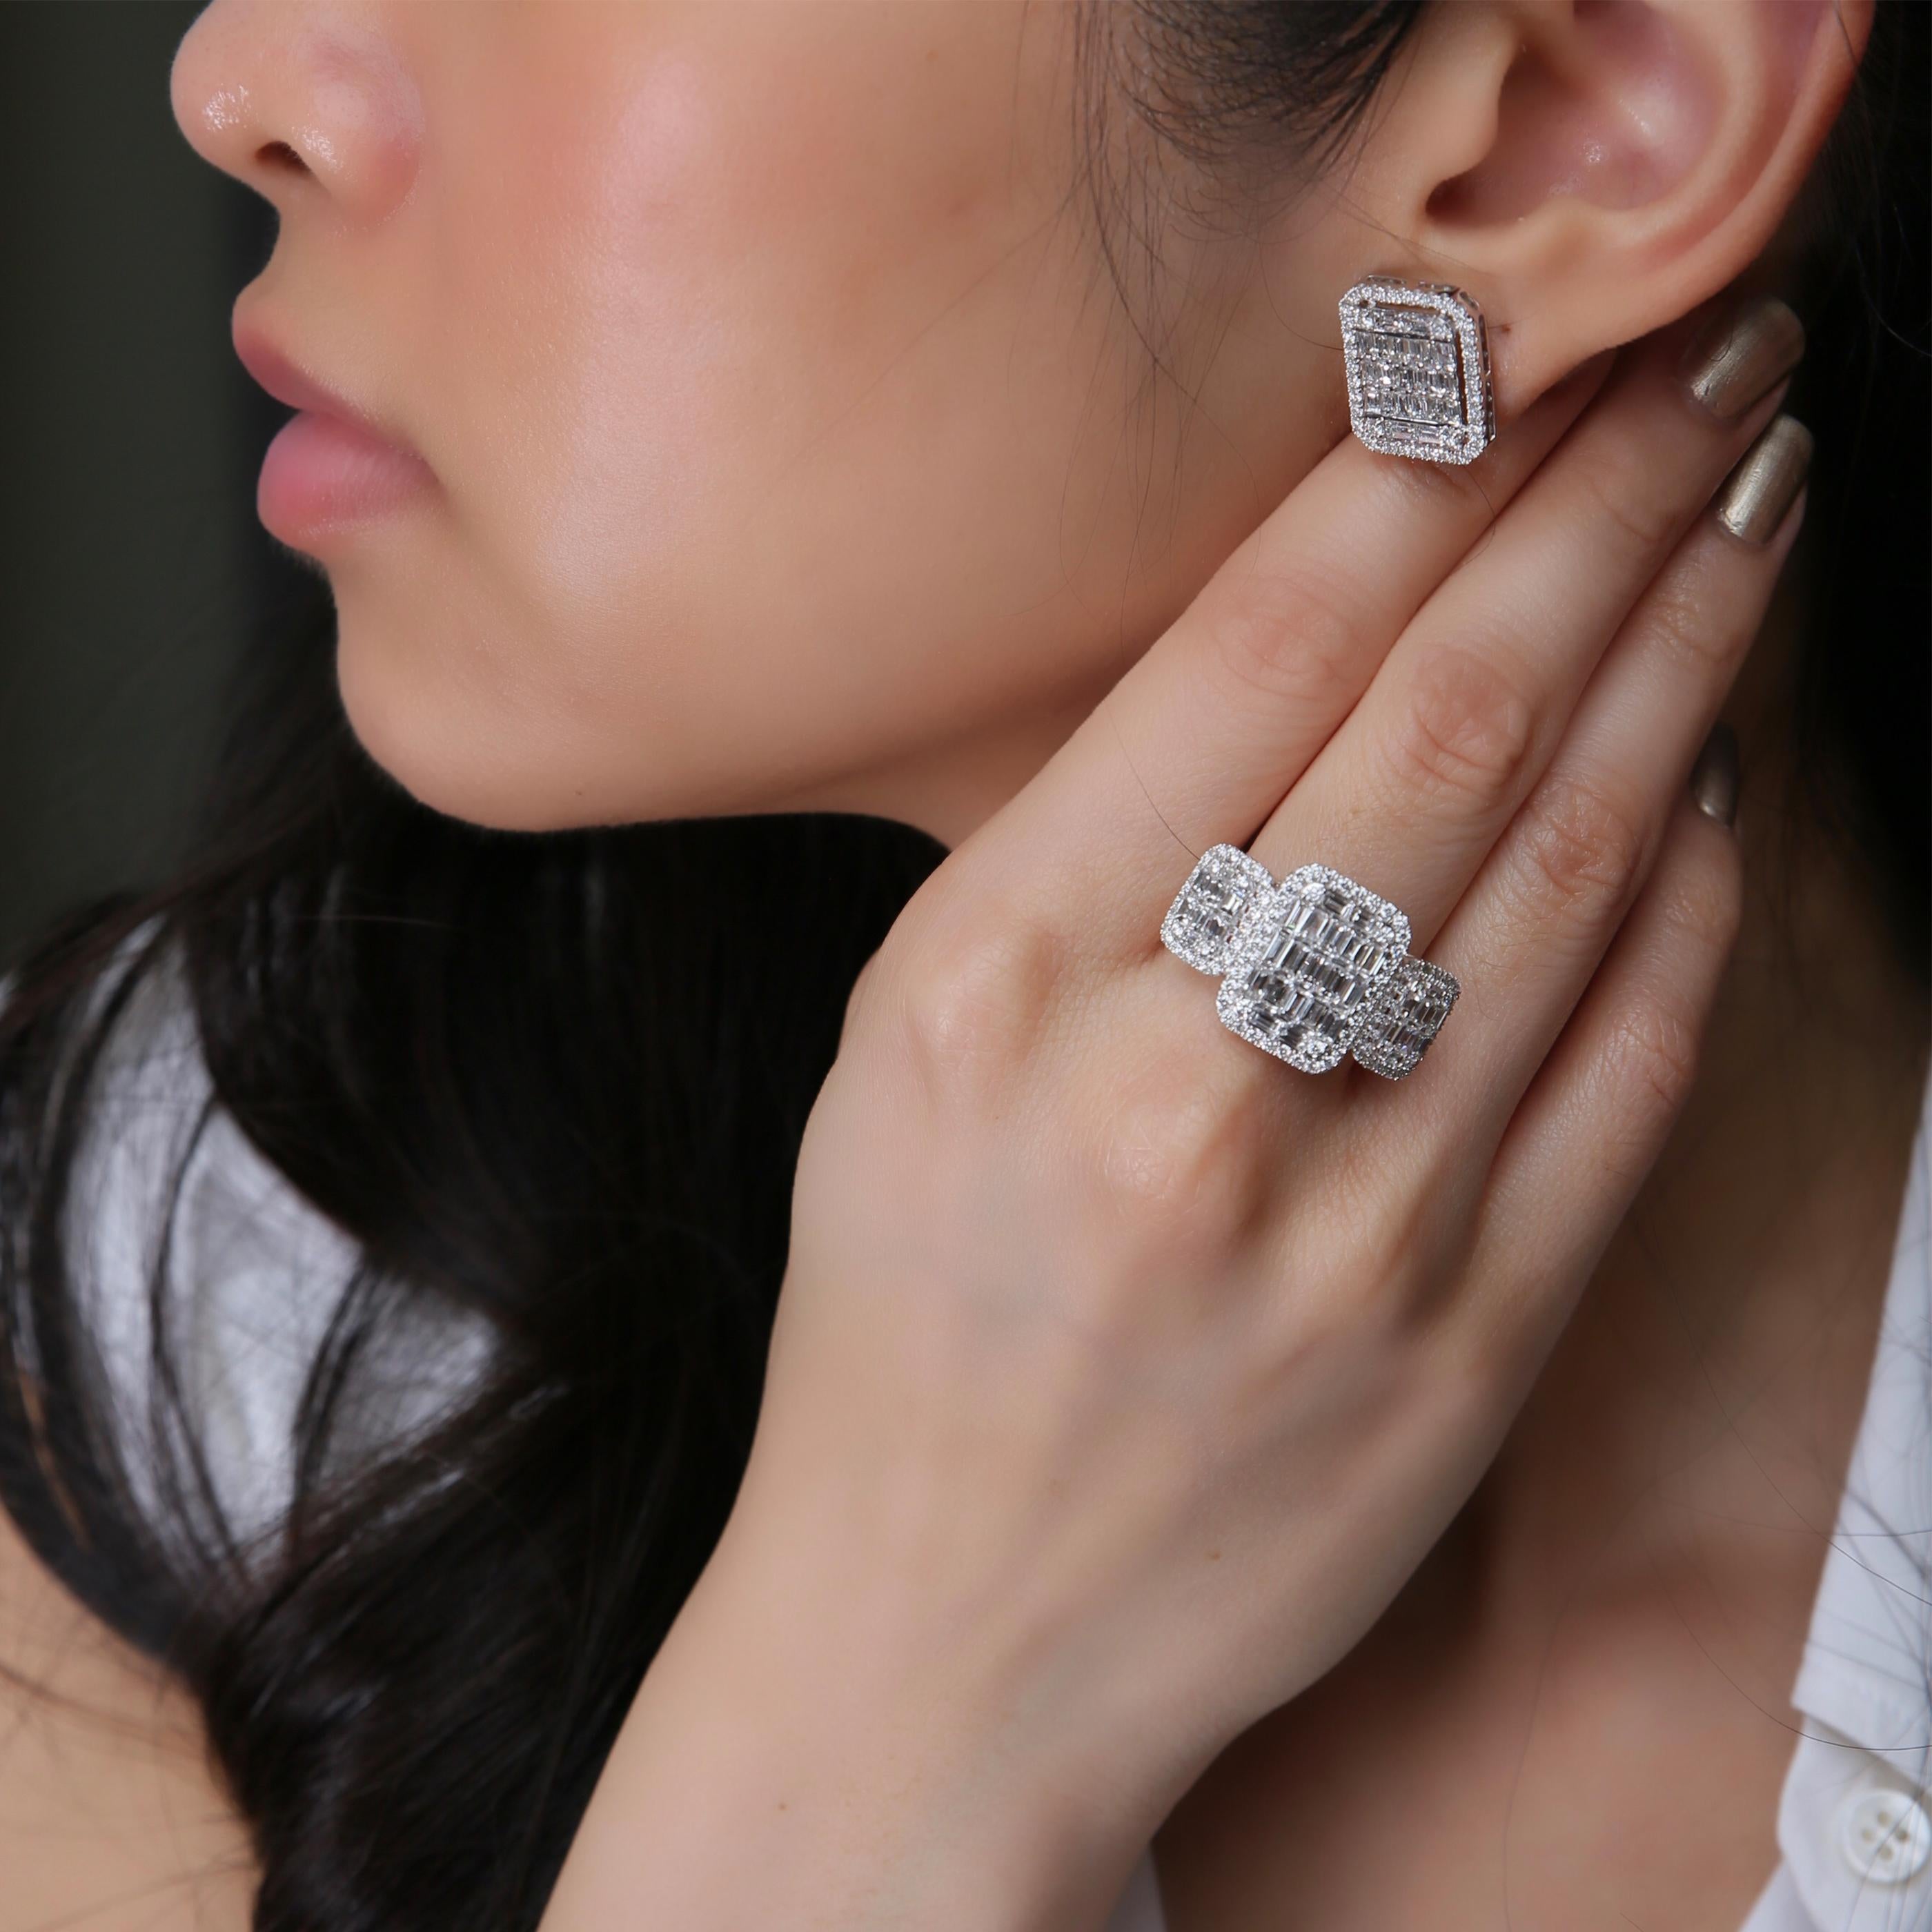 This medium diamond earring and ring set is crafted in 18-karat white gold, weighing approximately 5.37 total carats of SI-V Quality white diamonds. The ring is comfortable and can be sized 